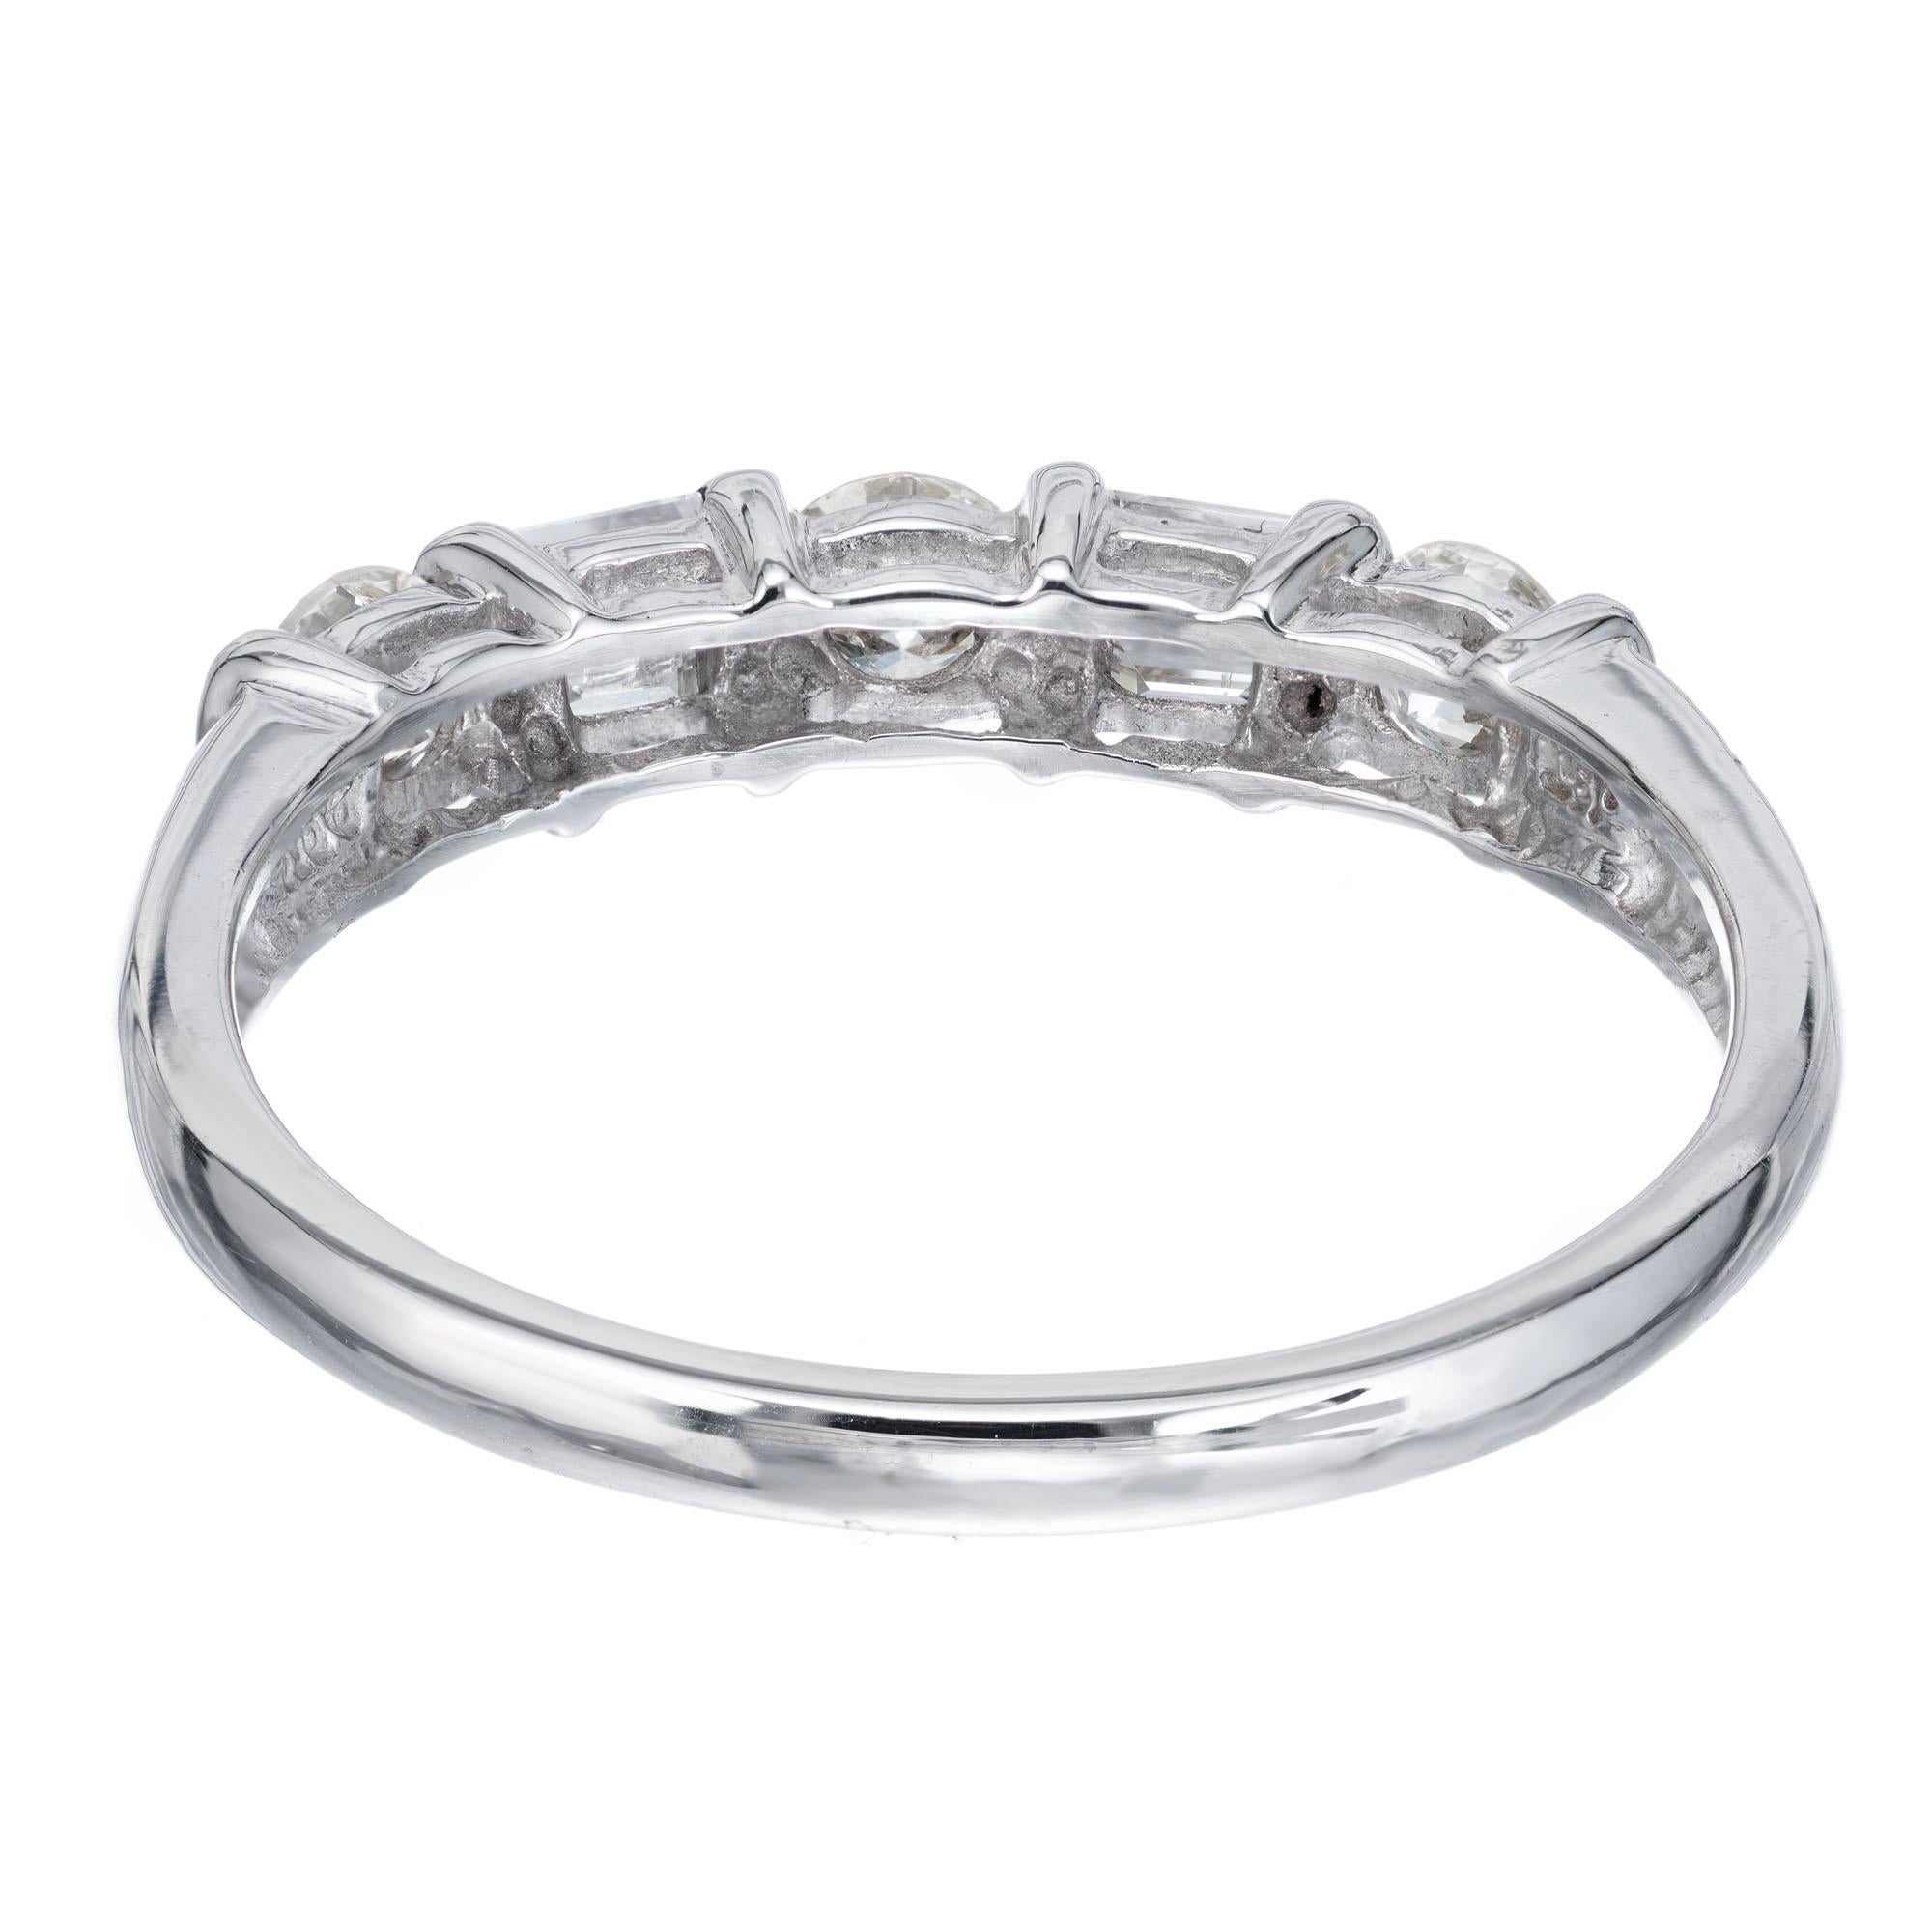 alternating round and baguette diamond wedding band